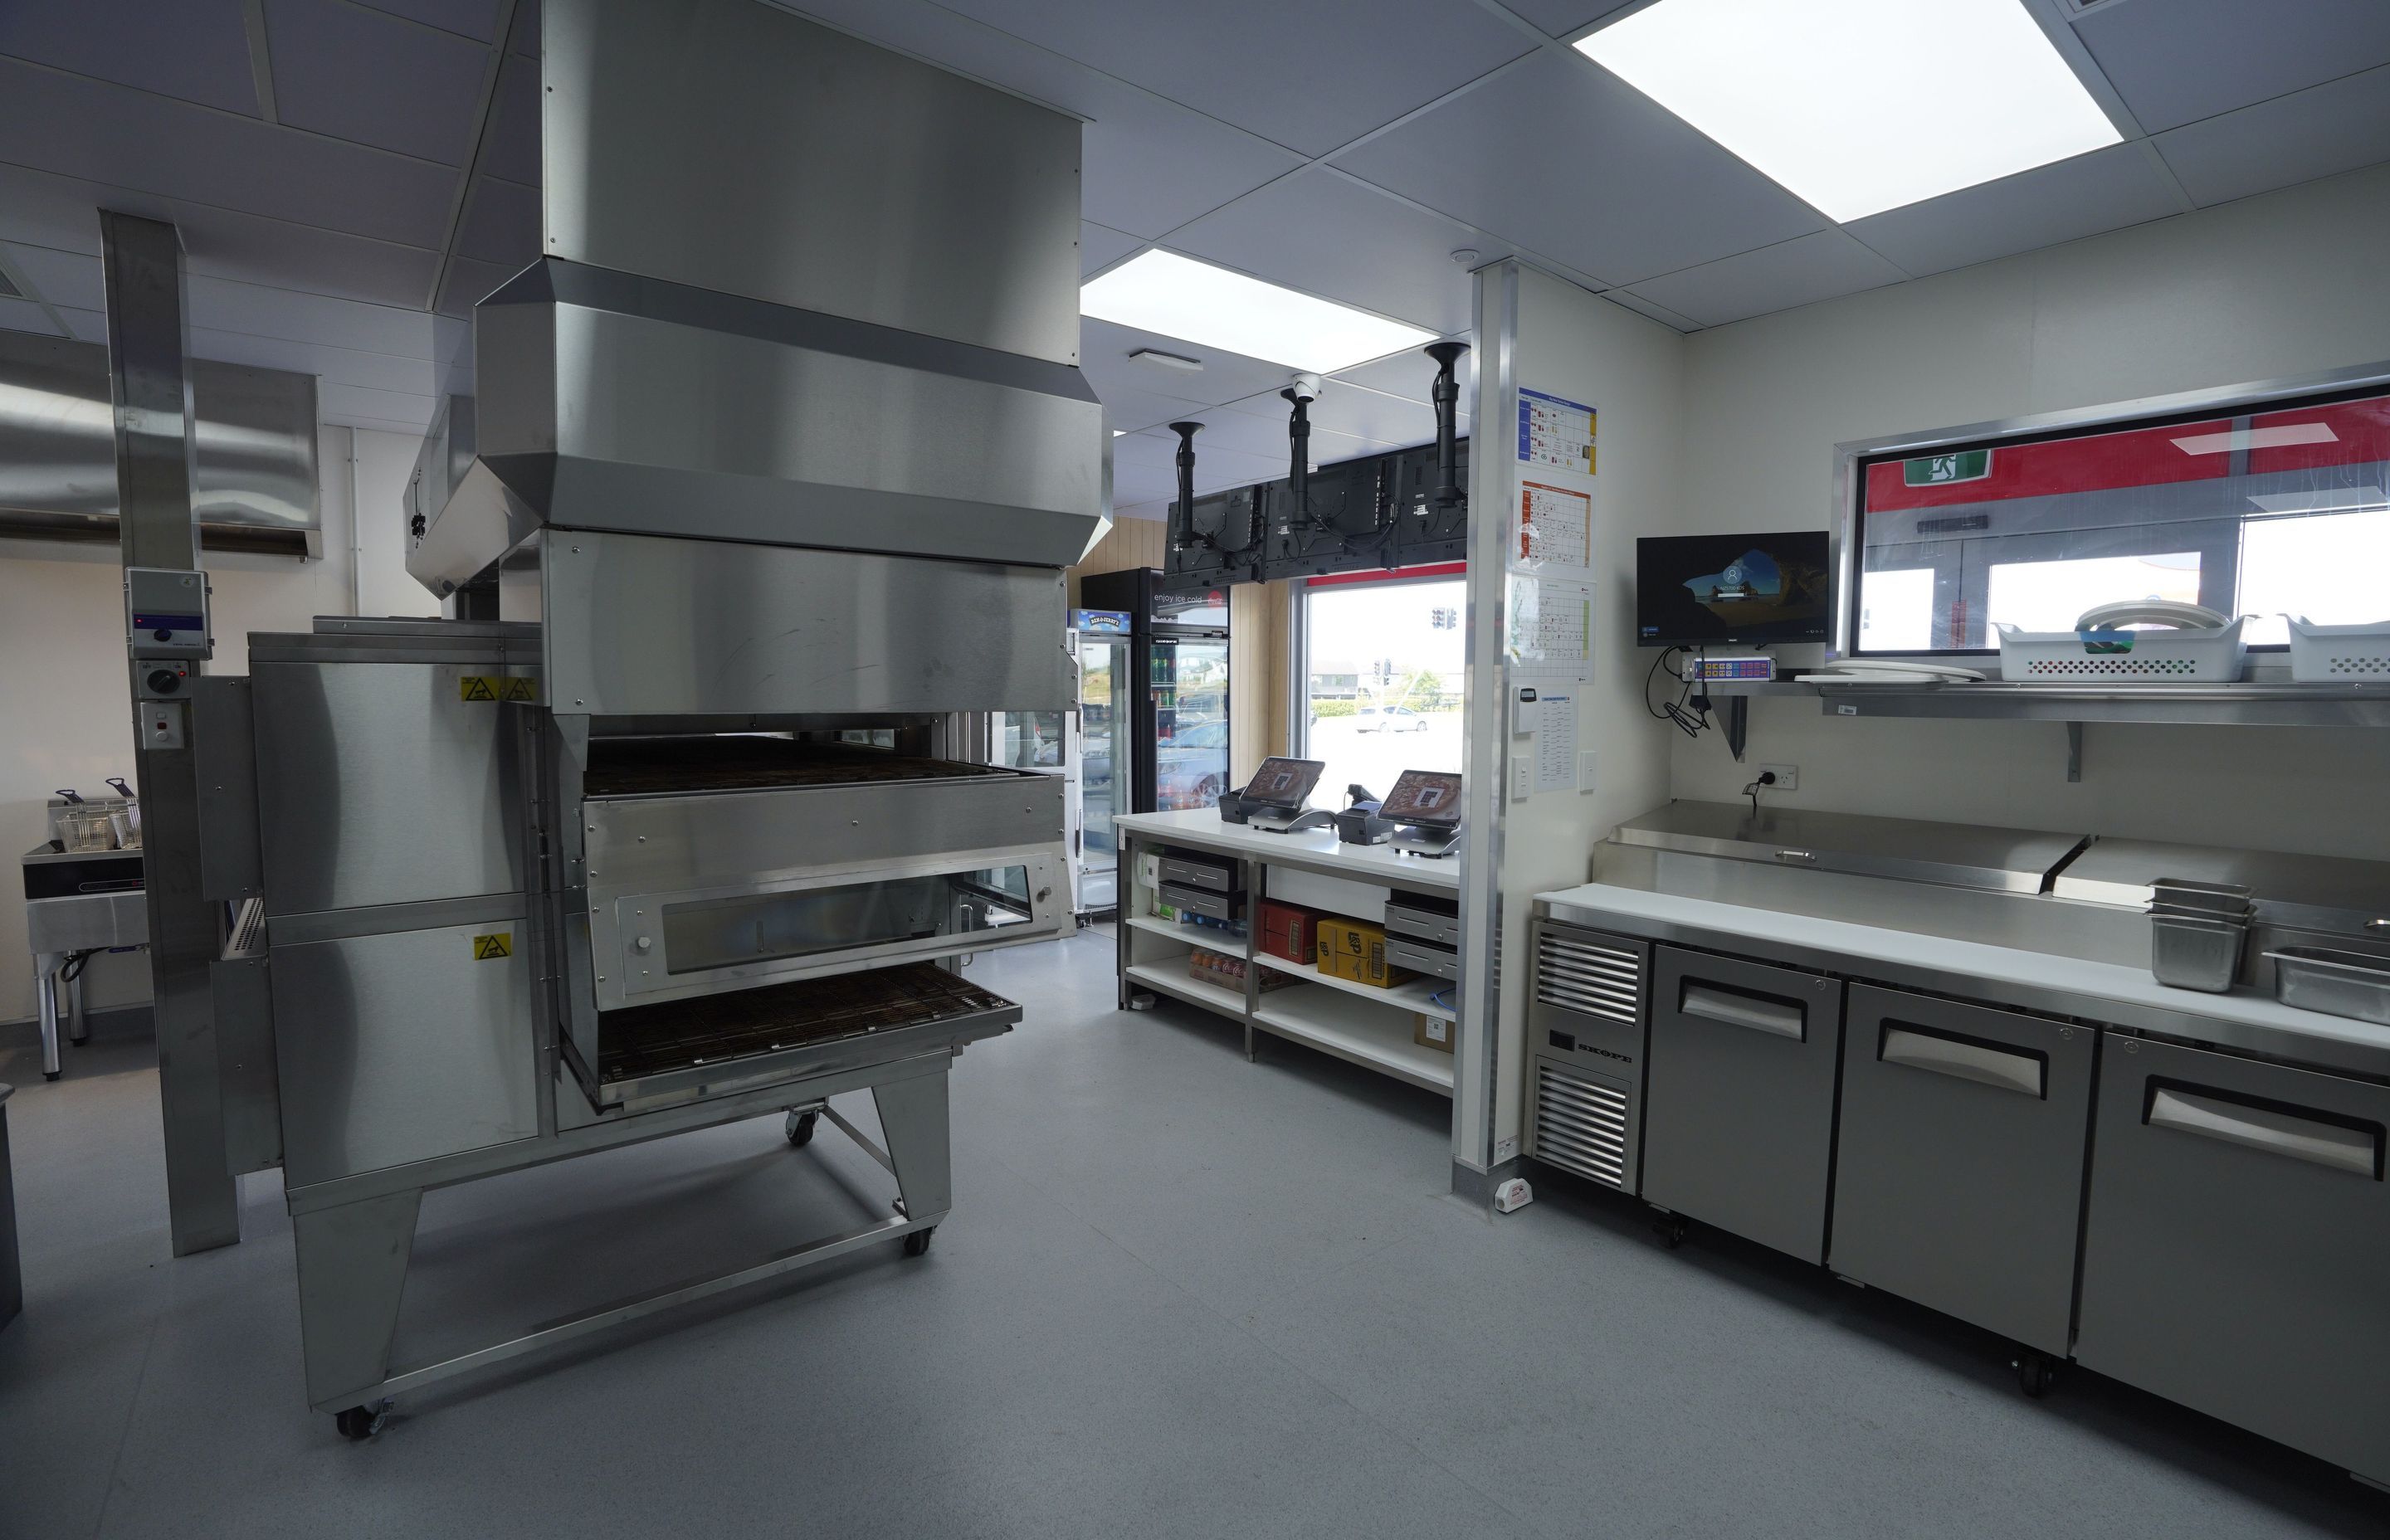 The Silk Design &amp; Build team meticulously plan commercial kitchen spaces around the needs of the staff.